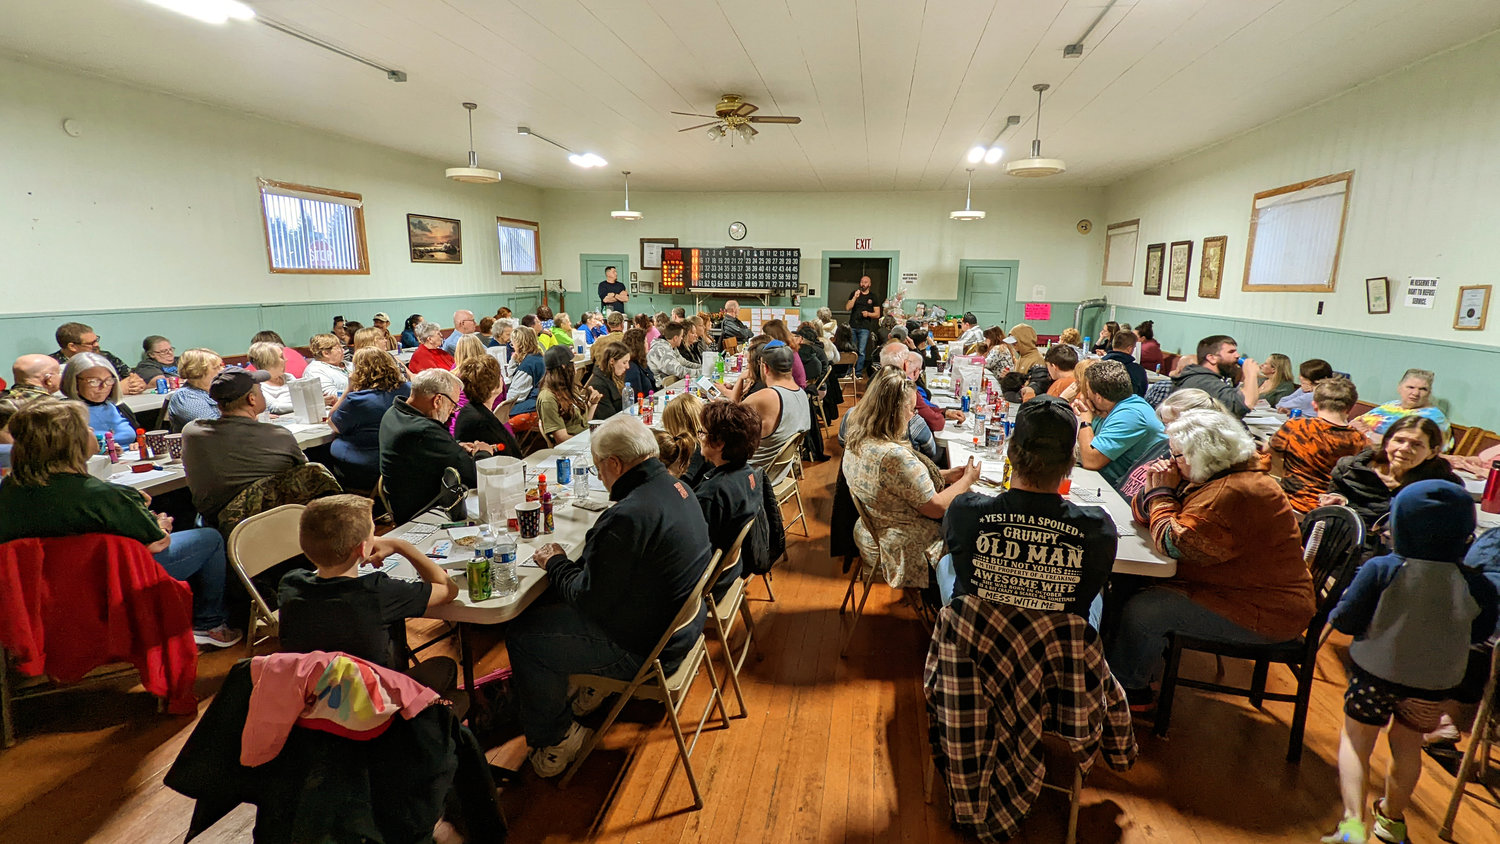 The Trinity Rebekah Lodge in Napavine held a spaghetti and bingo fundraising event on May 7 in support of the L.C. Renal Alliance.